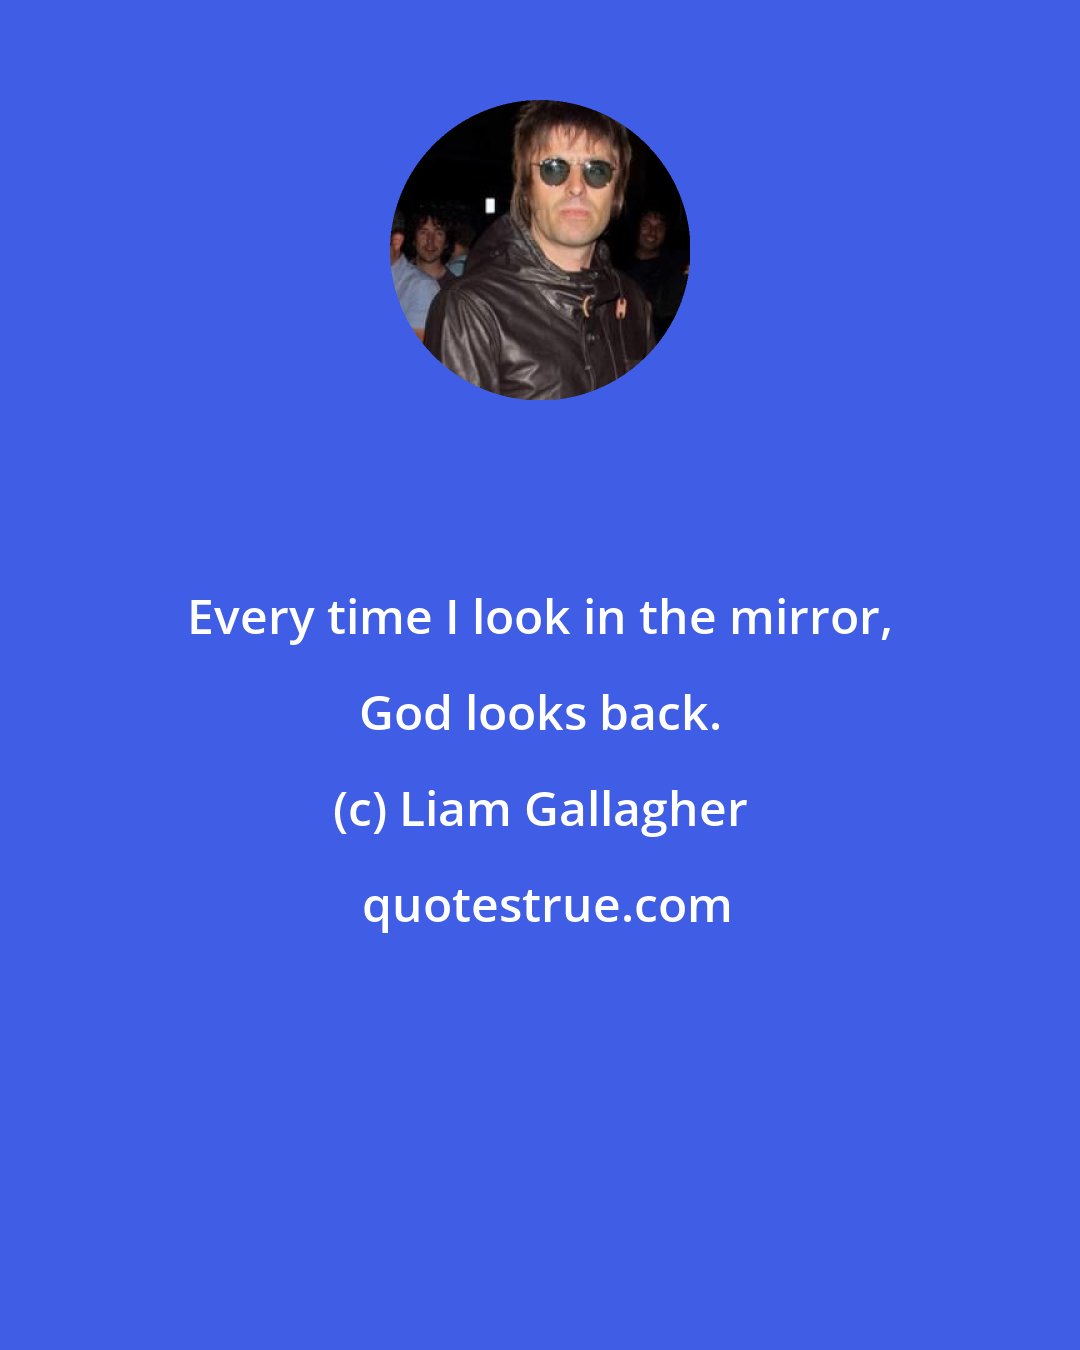 Liam Gallagher: Every time I look in the mirror, God looks back.